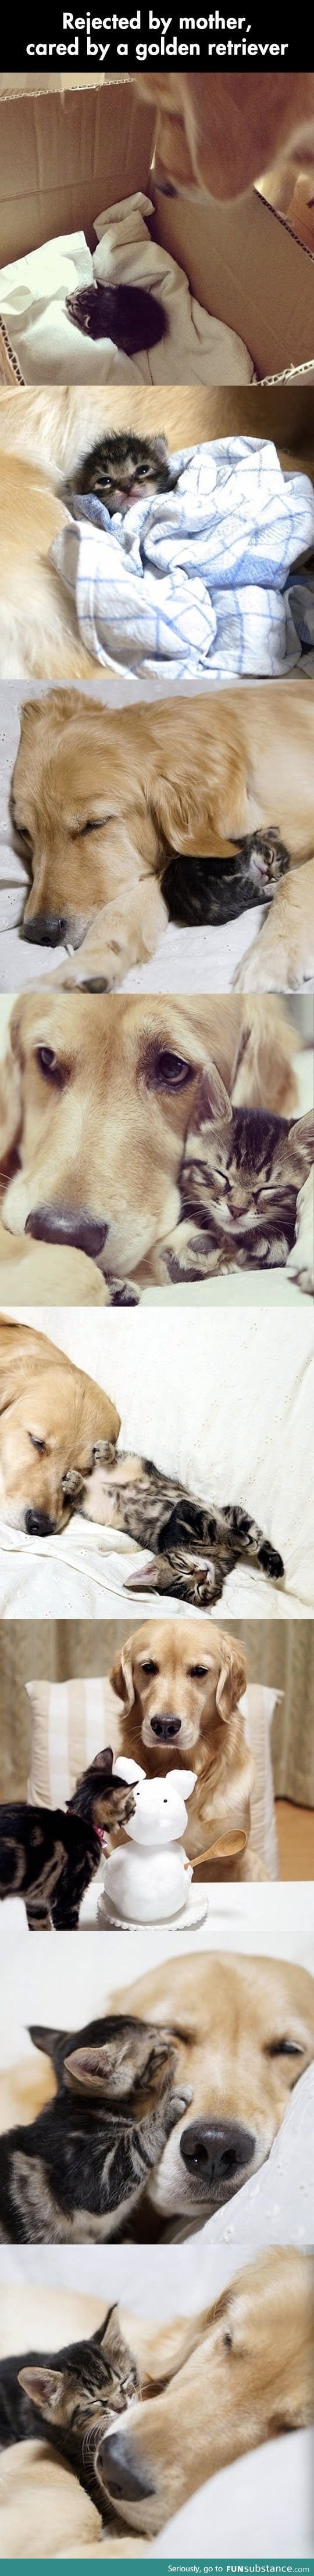 Golden retriever adopts a kitten abandoned by its mother